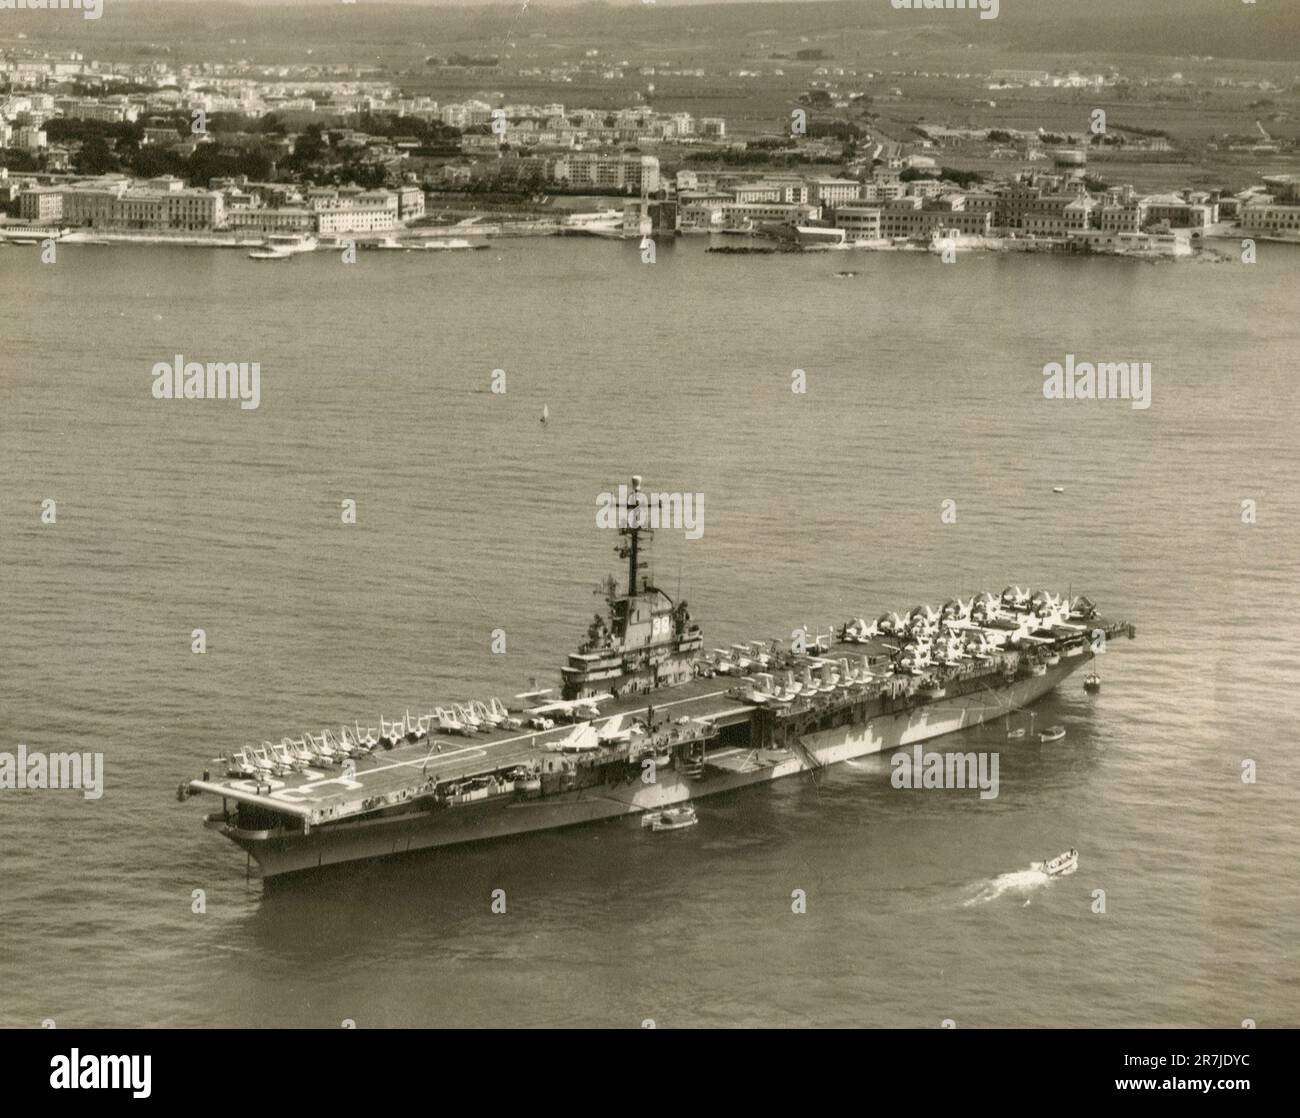 USS Lake Champlain Essex-class aircraft carrier at the anchor, USA 1950s Stock Photo